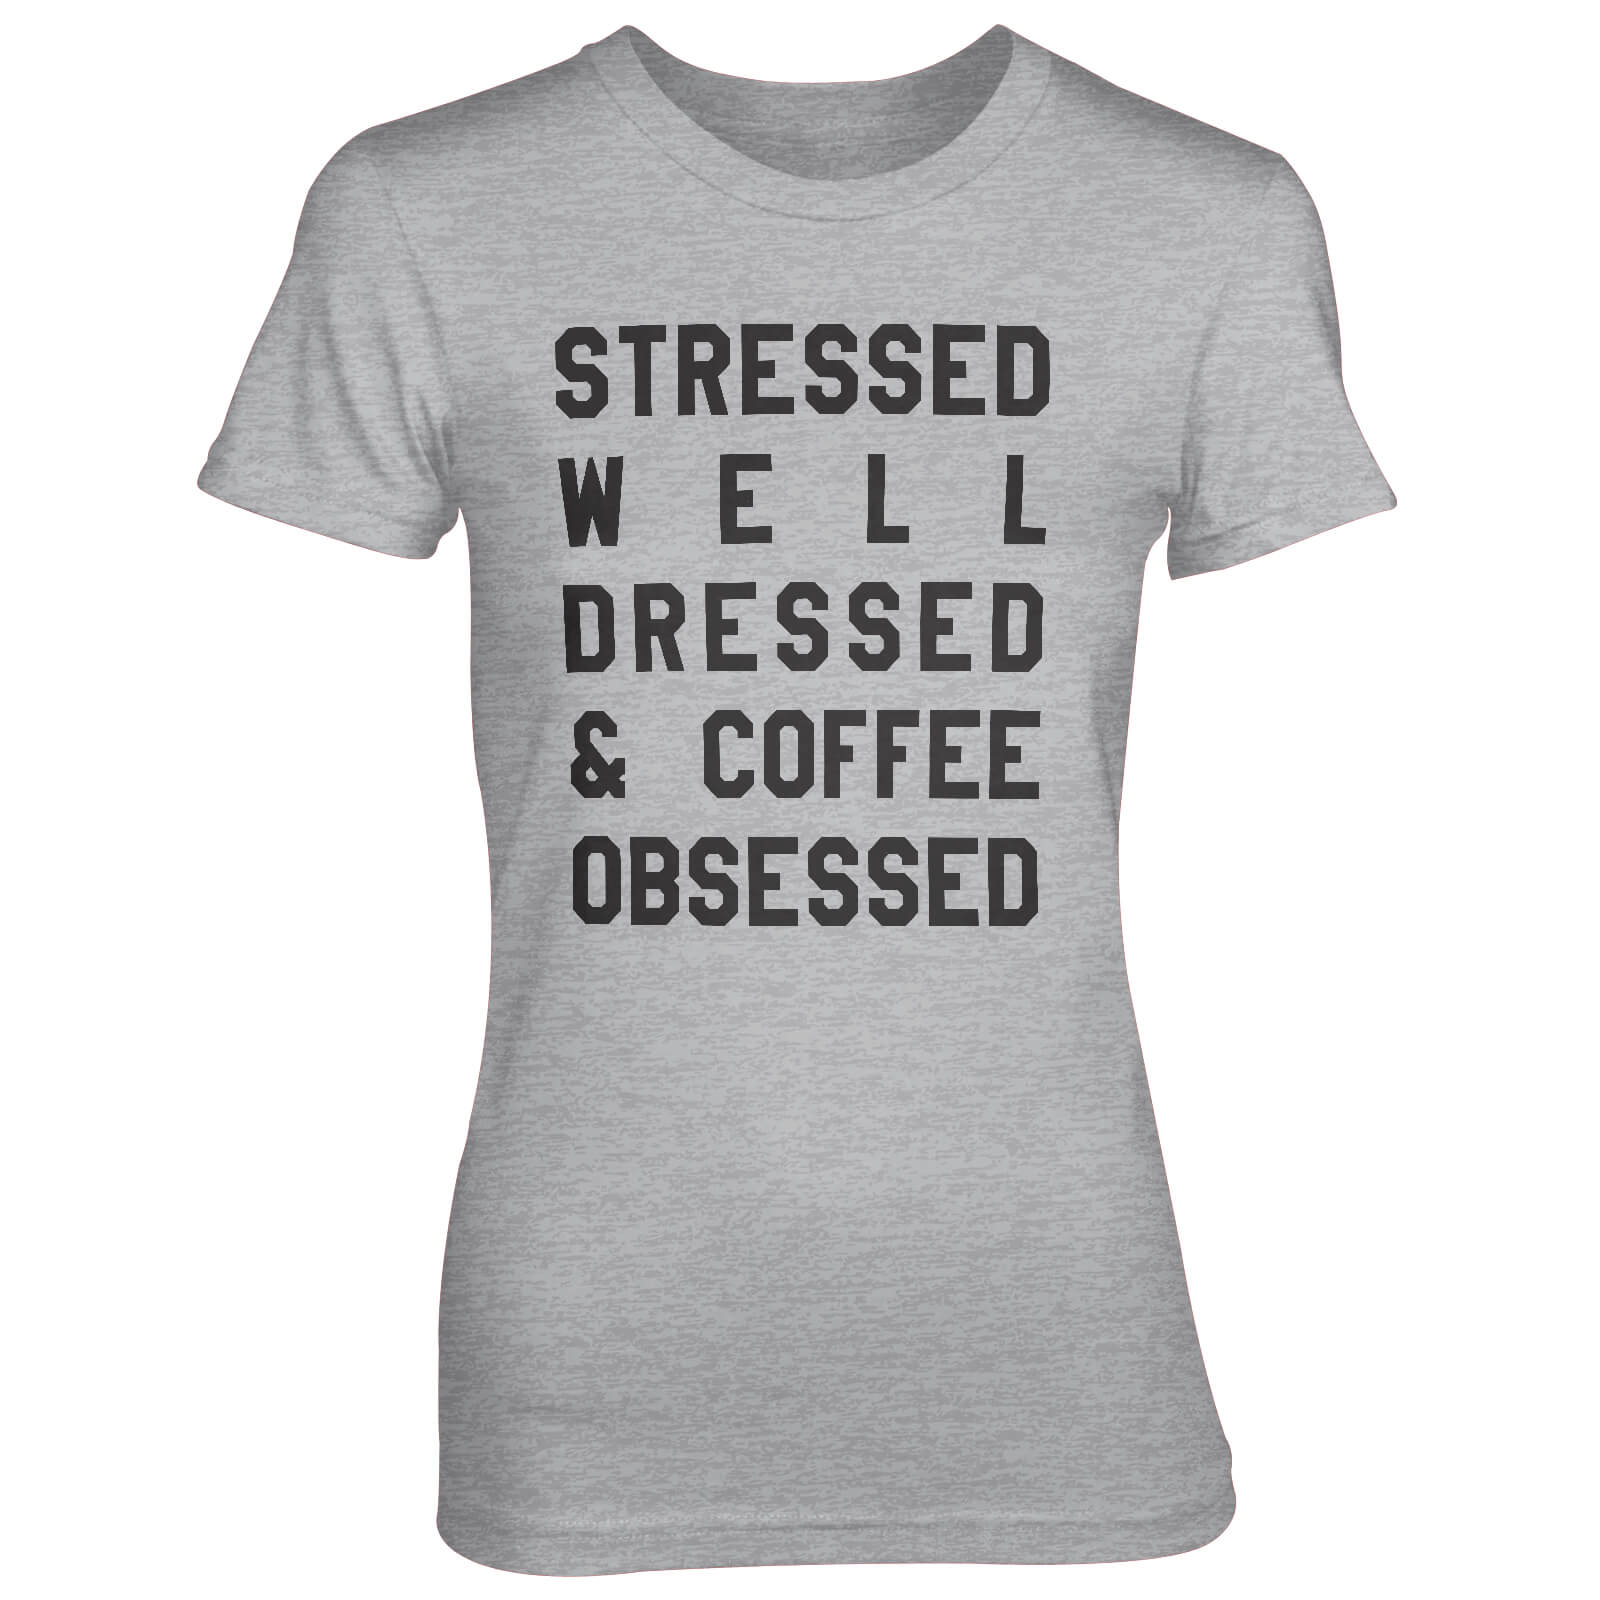 Stressed Well Dressed And Coffee Obsessed Women's Grey T-Shirt - S - Grey